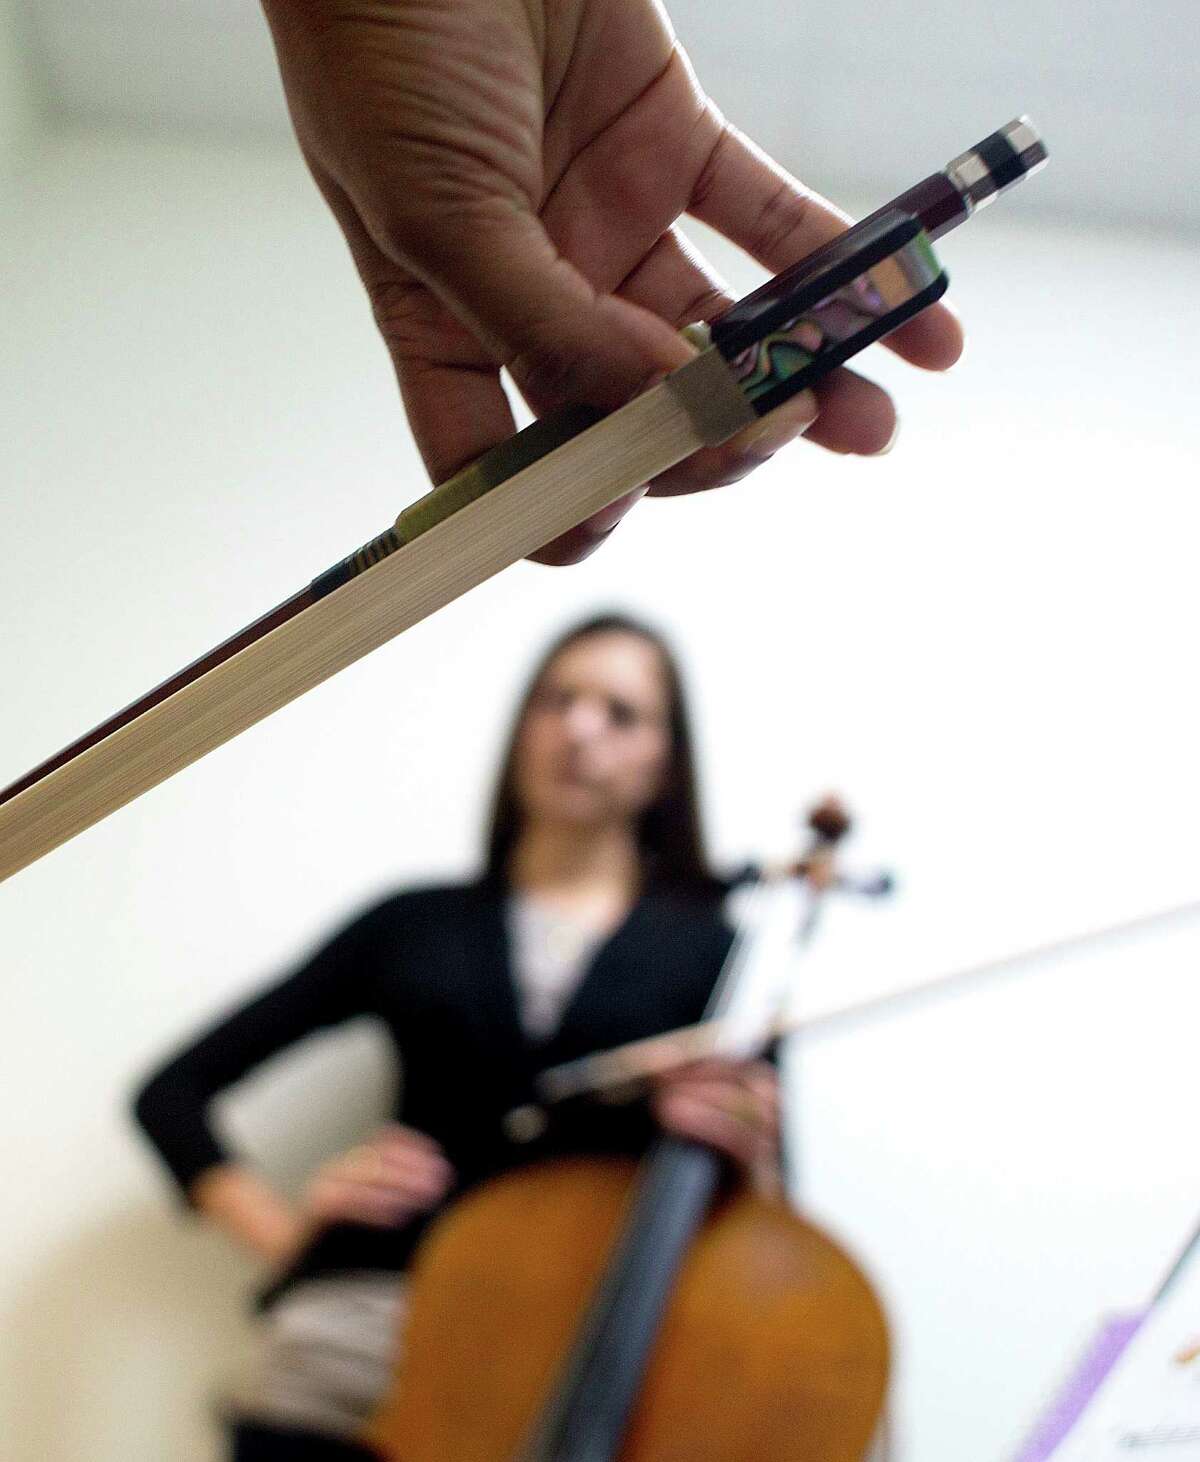 Instructor Annamarie Reader listens as a student practices at the Vivaldi Music Academy in Bellaire.